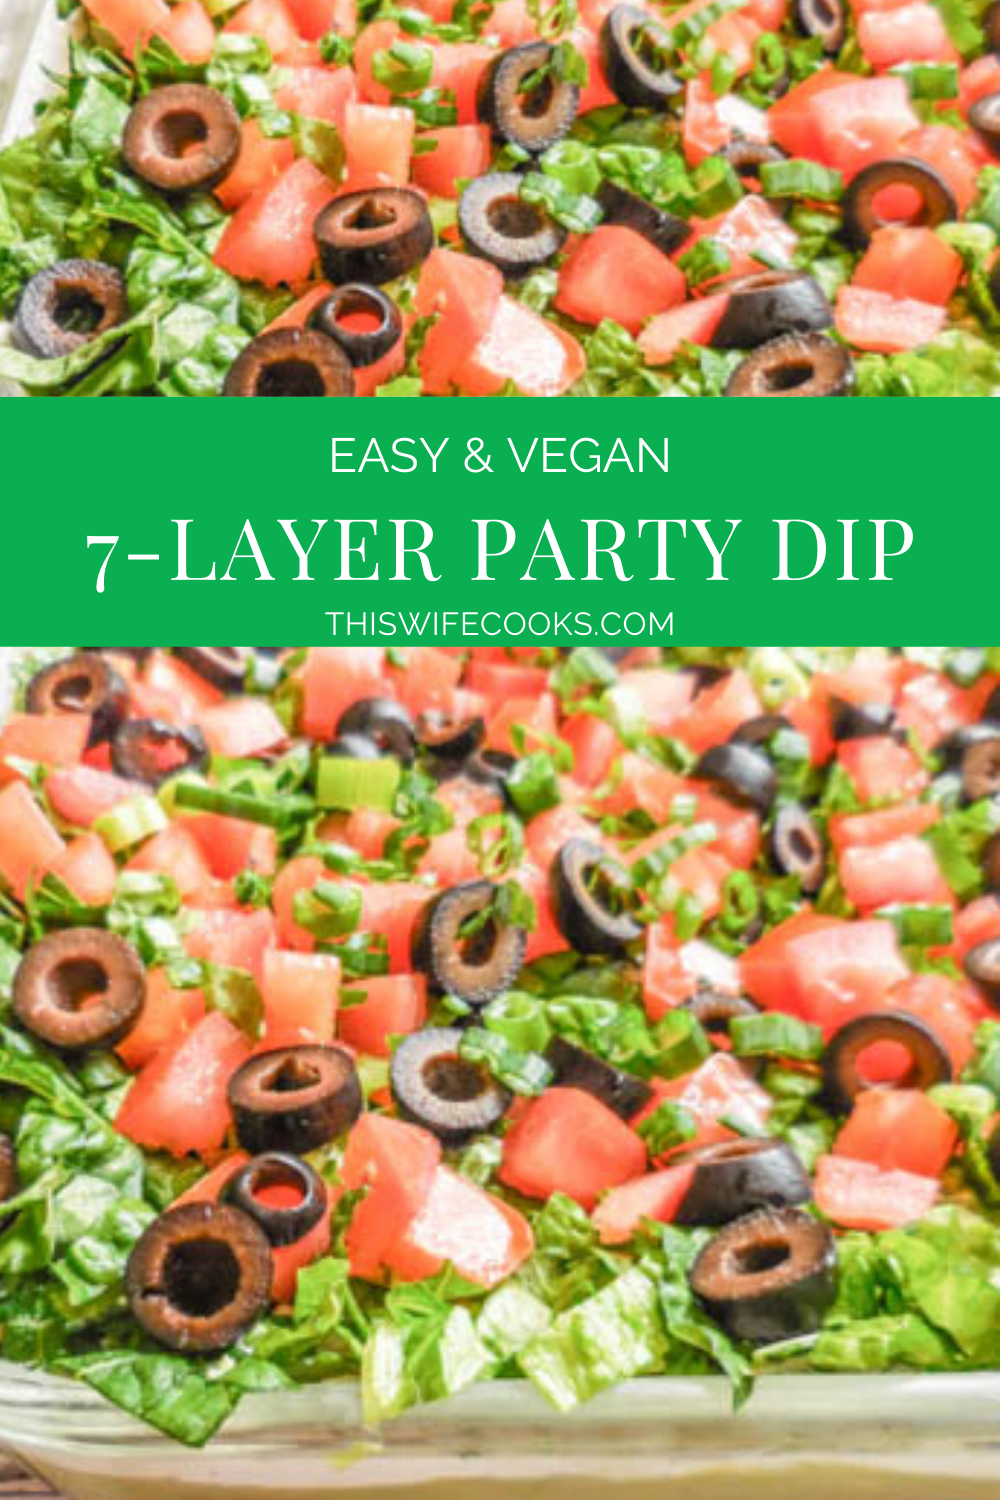 Vegan 7-Layer Party Dip - Seven layers of taco-spiced refried beans, homemade guacamole, vegan sour cream, lettuce, tomatoes, black olives, & green onions. via @thiswifecooks